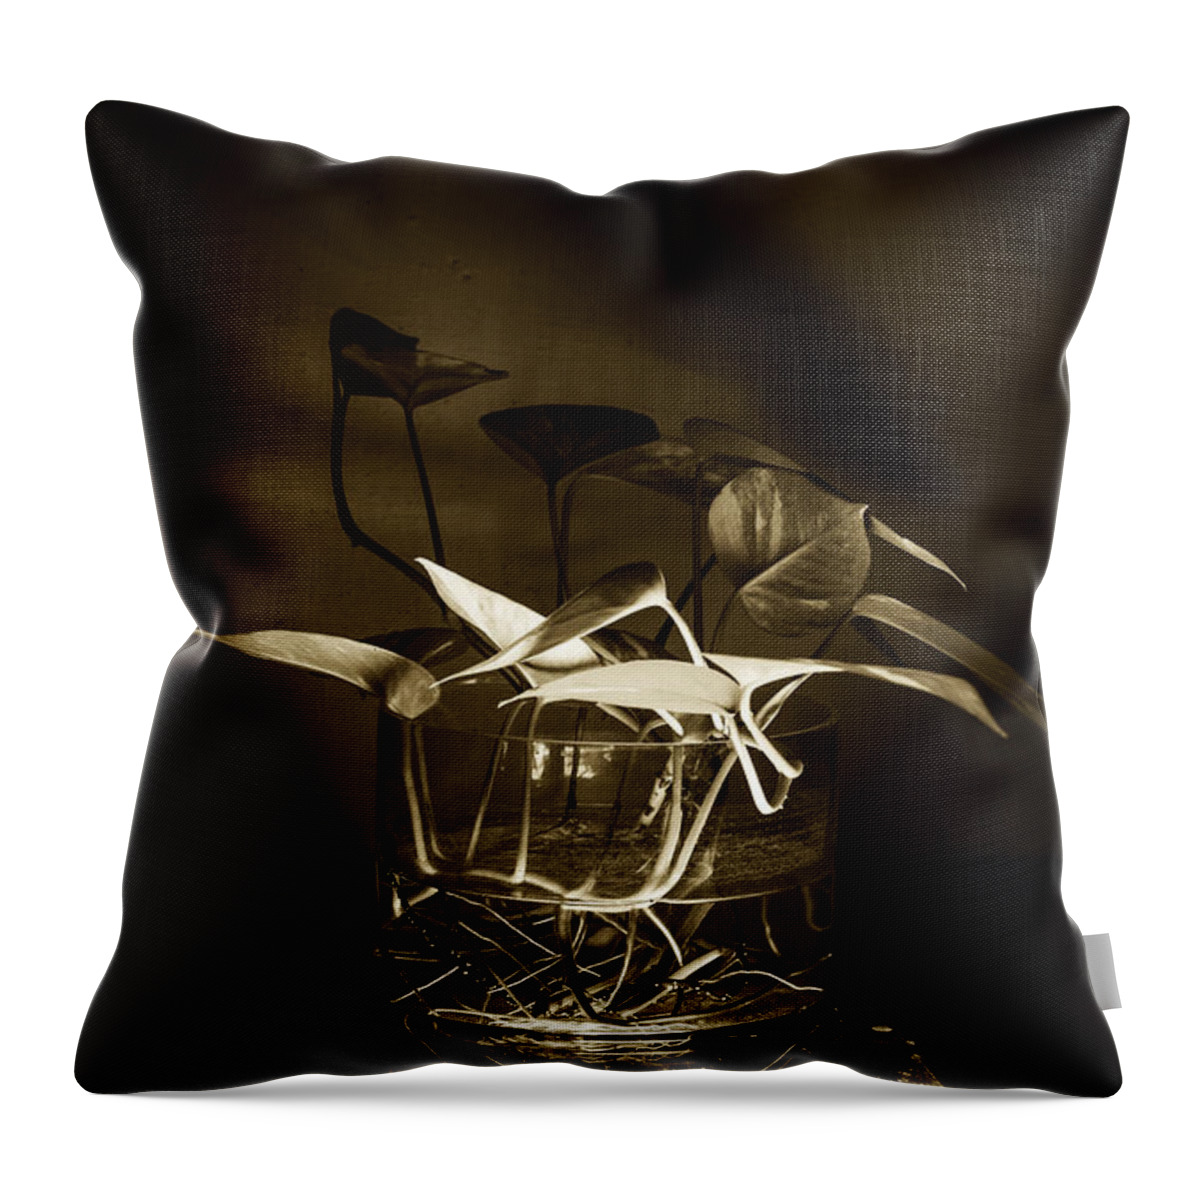 Money Plant Throw Pillow featuring the photograph In Brown Light by Rajiv Chopra